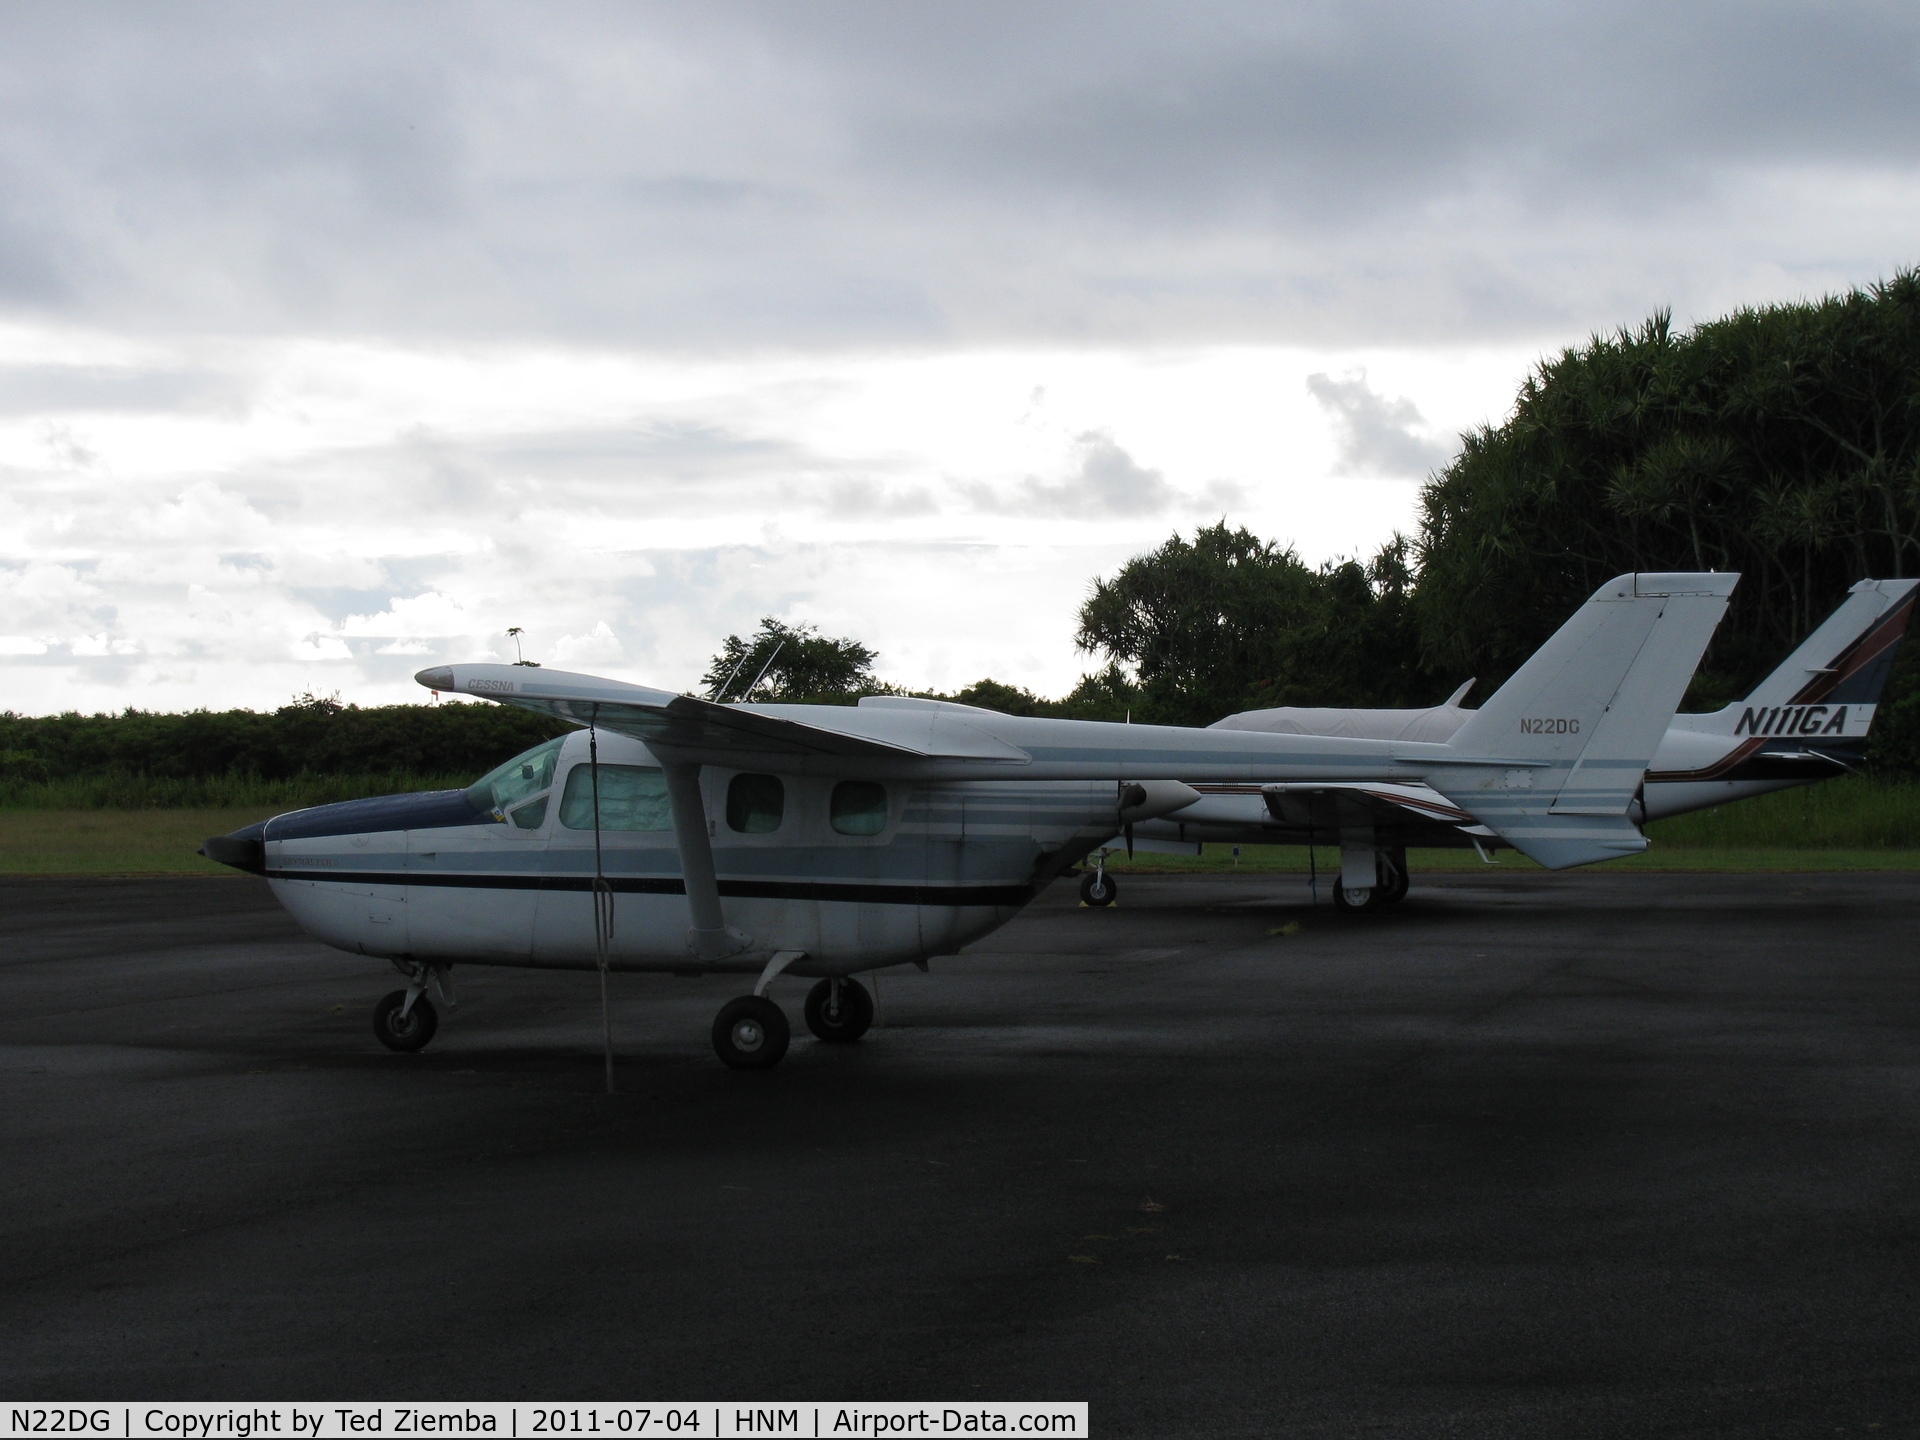 N22DG, Cessna 337 Super Skymaster C/N 337-01932, One of four airplanes seen on the tarmac at Hana Airport.